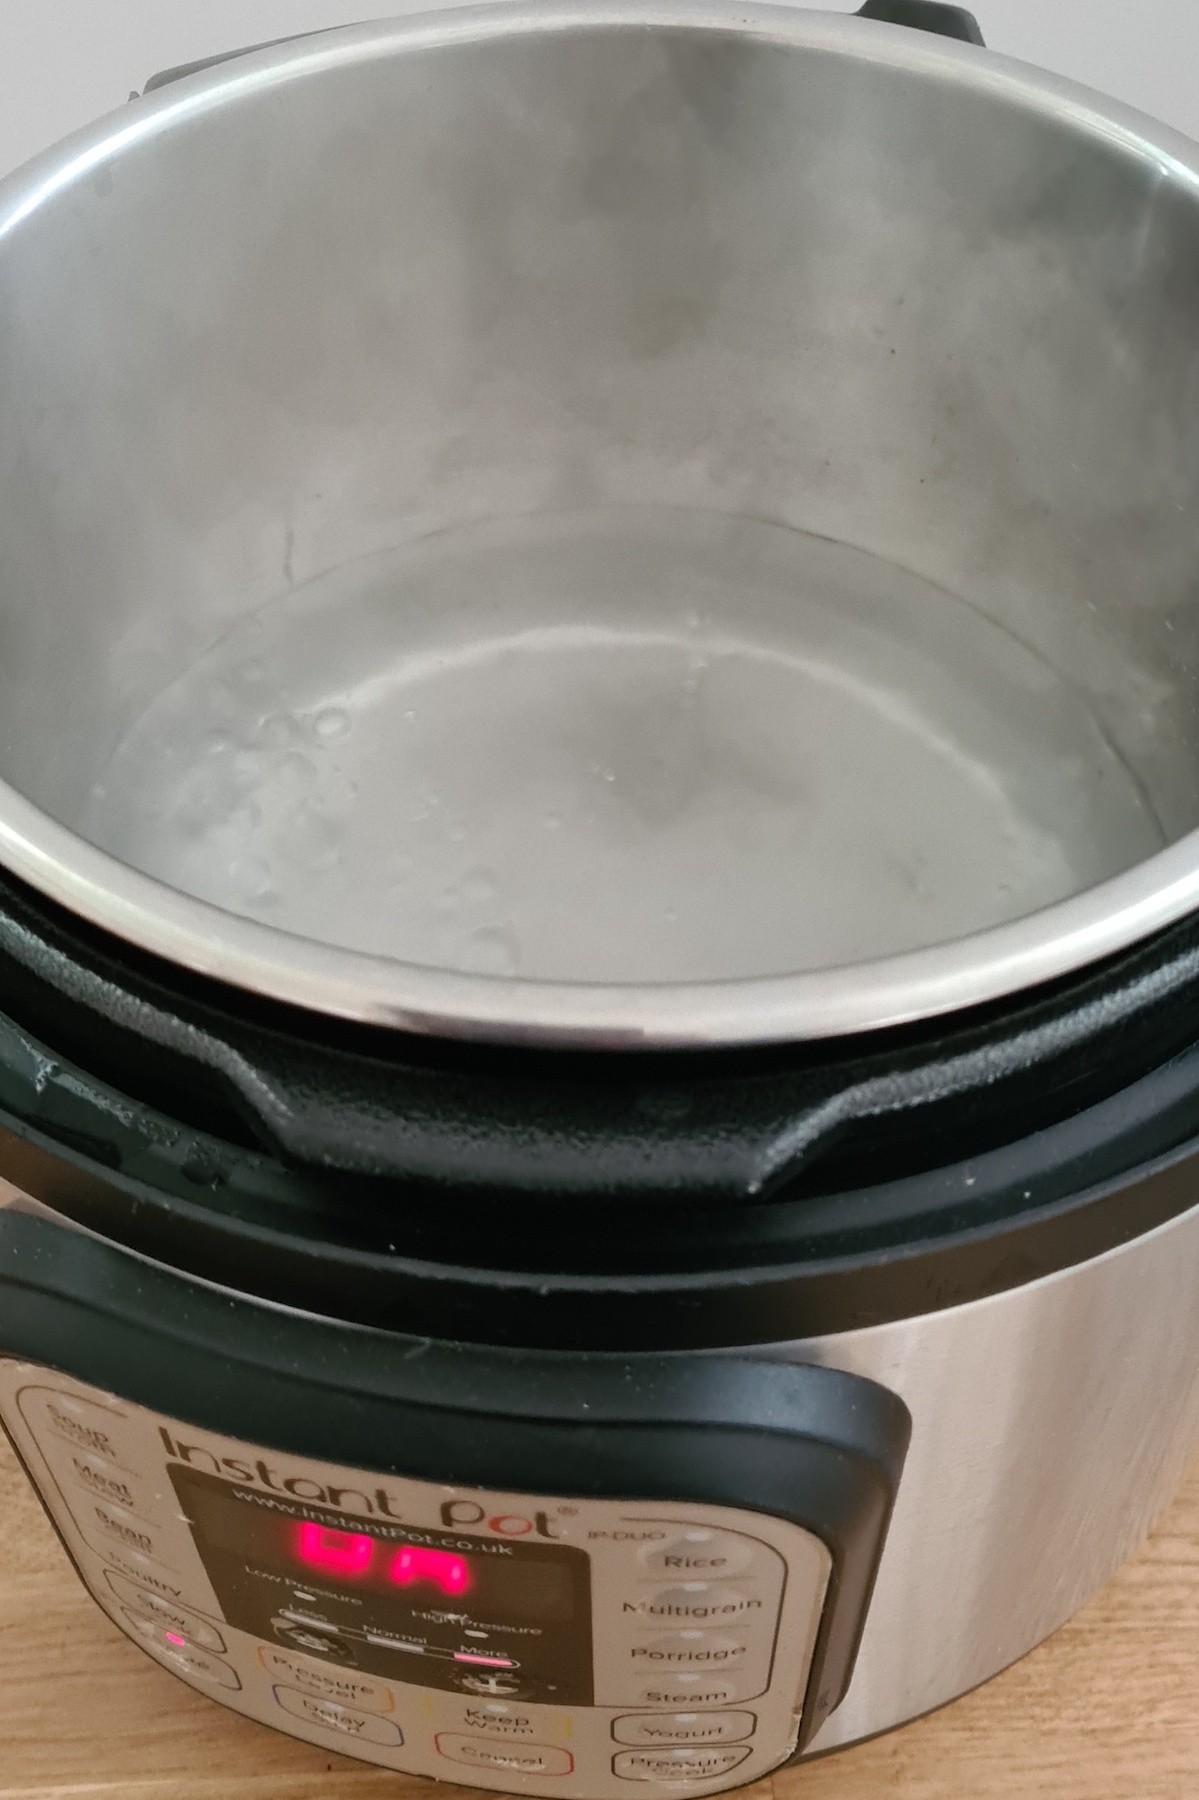 https://recipesfromapantry.com/wp-content/uploads/2022/05/how-to-boil-water-in-instant-pot_183048_resized.jpg